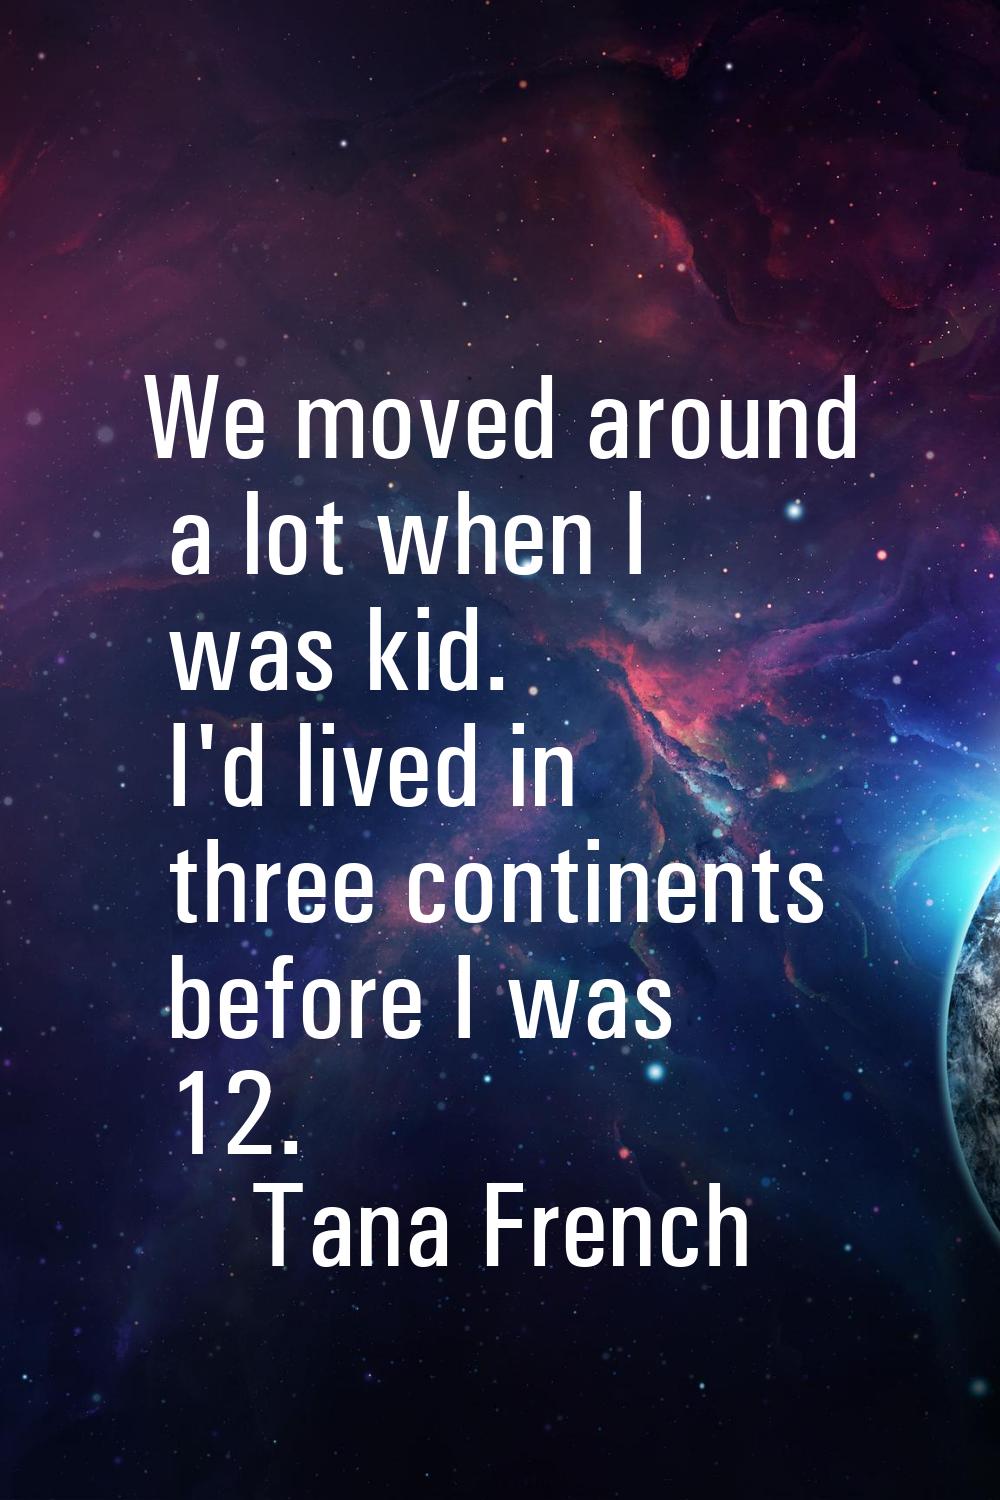 We moved around a lot when I was kid. I'd lived in three continents before I was 12.